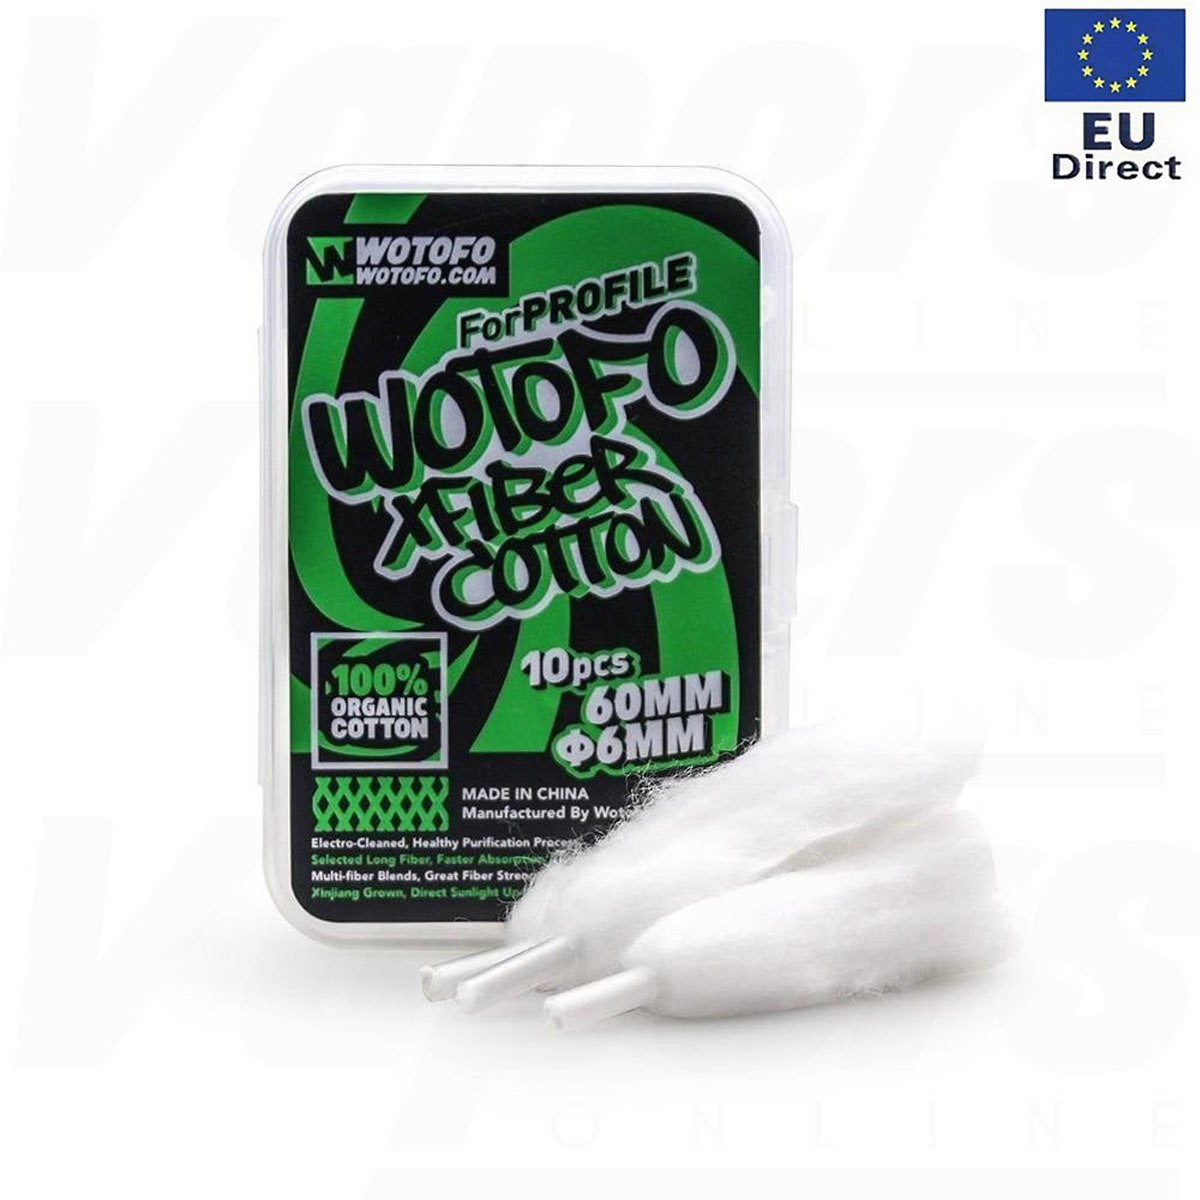 [EU]Authentic Wotofo Agleted Organic Cotton 6mm x 50